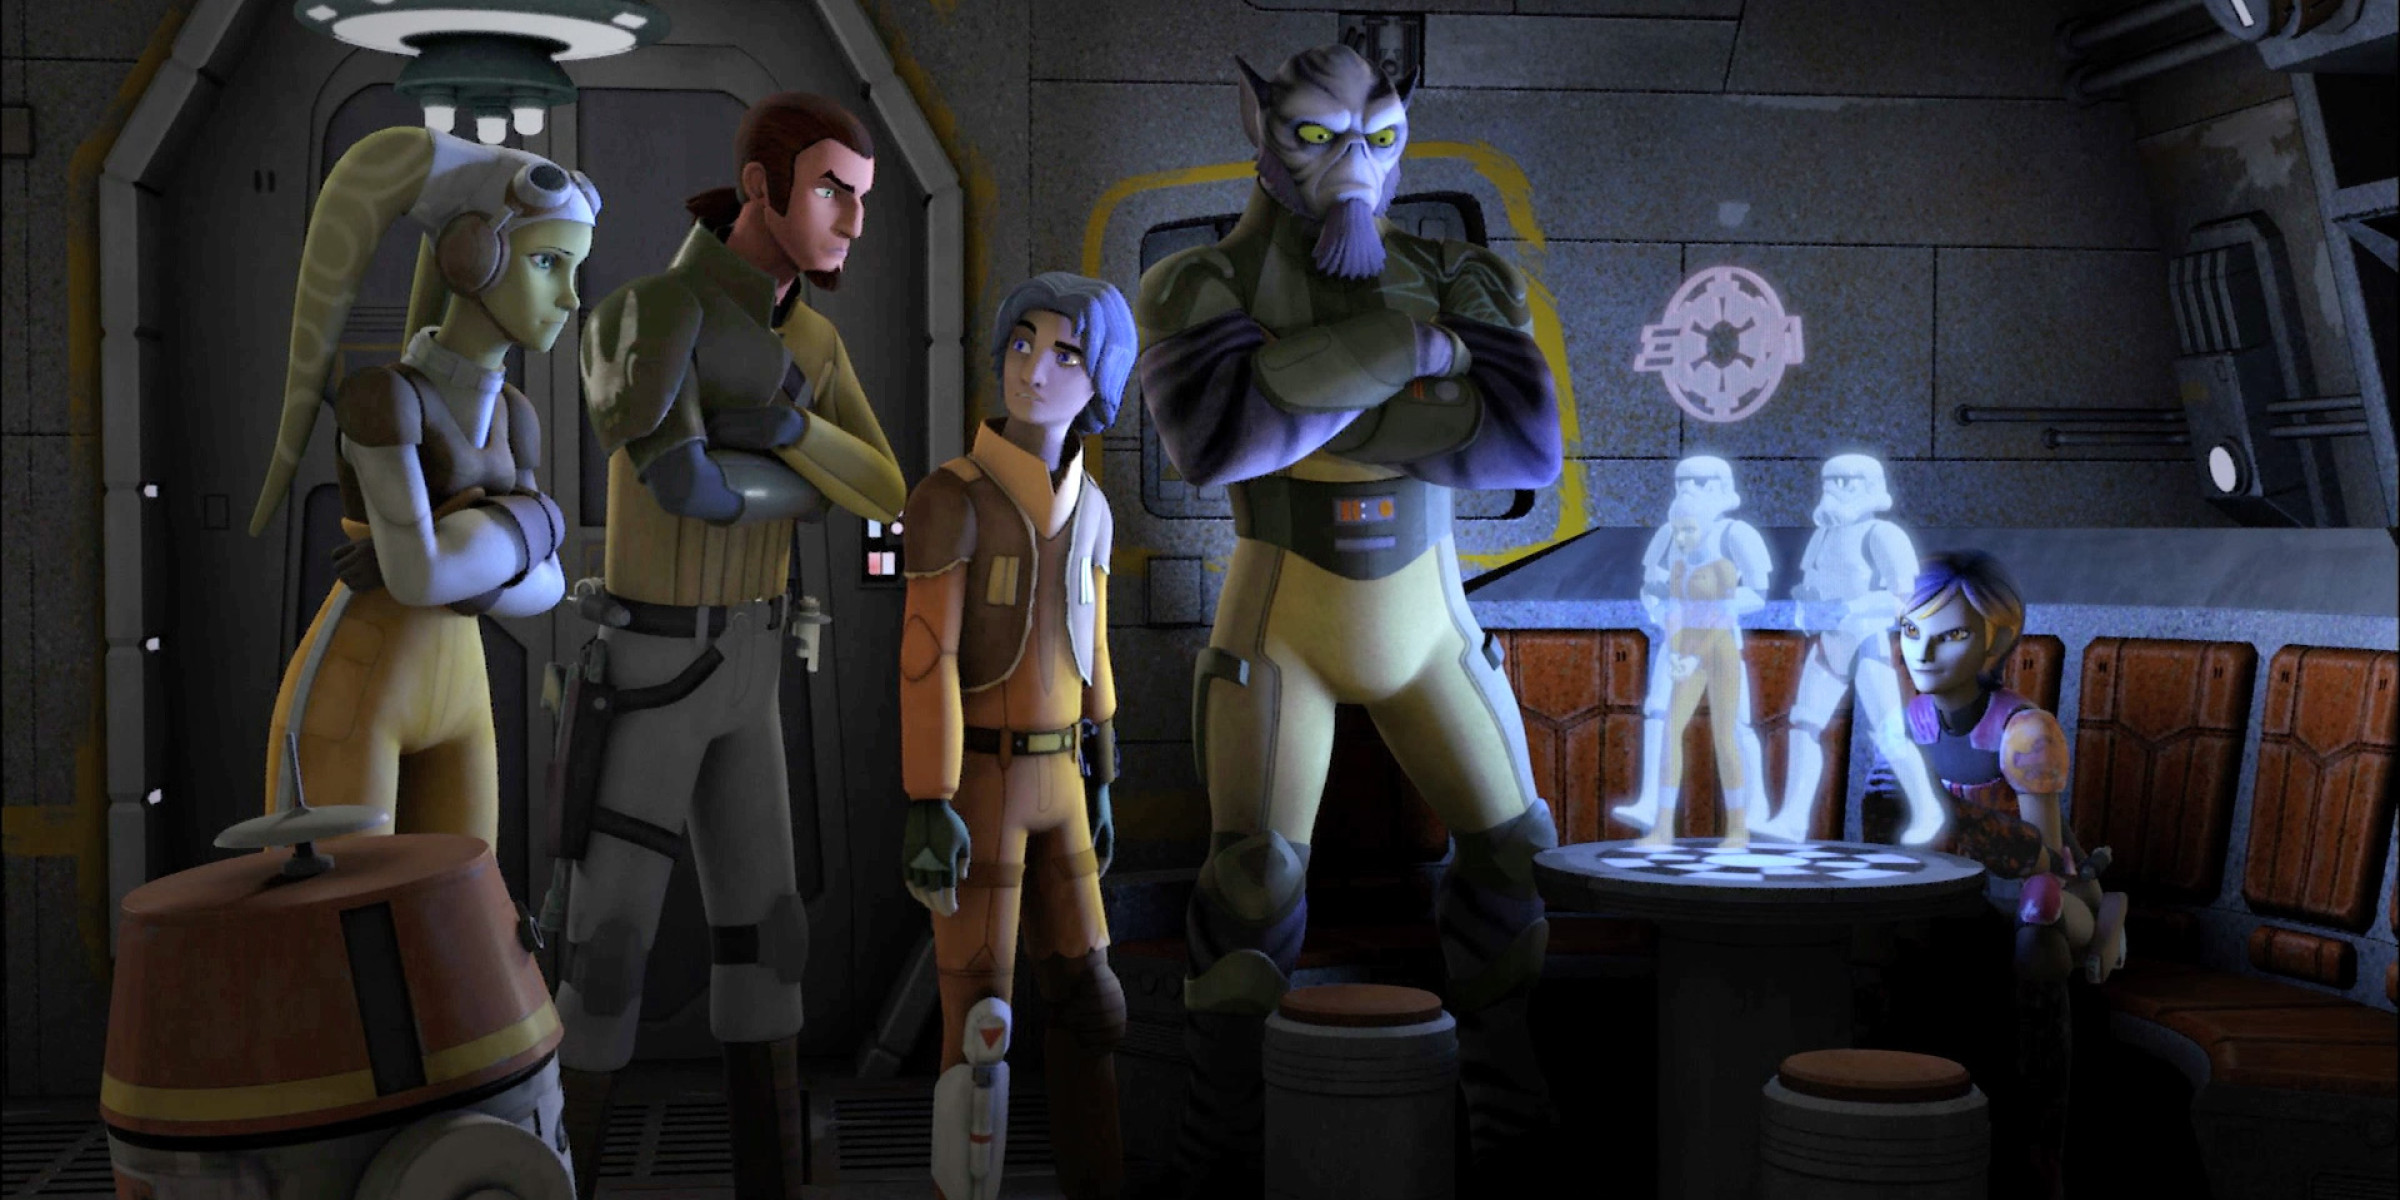 Watch This: Star Wars Rebels is the Bridge between the Prequel Era and the Original Trilogy